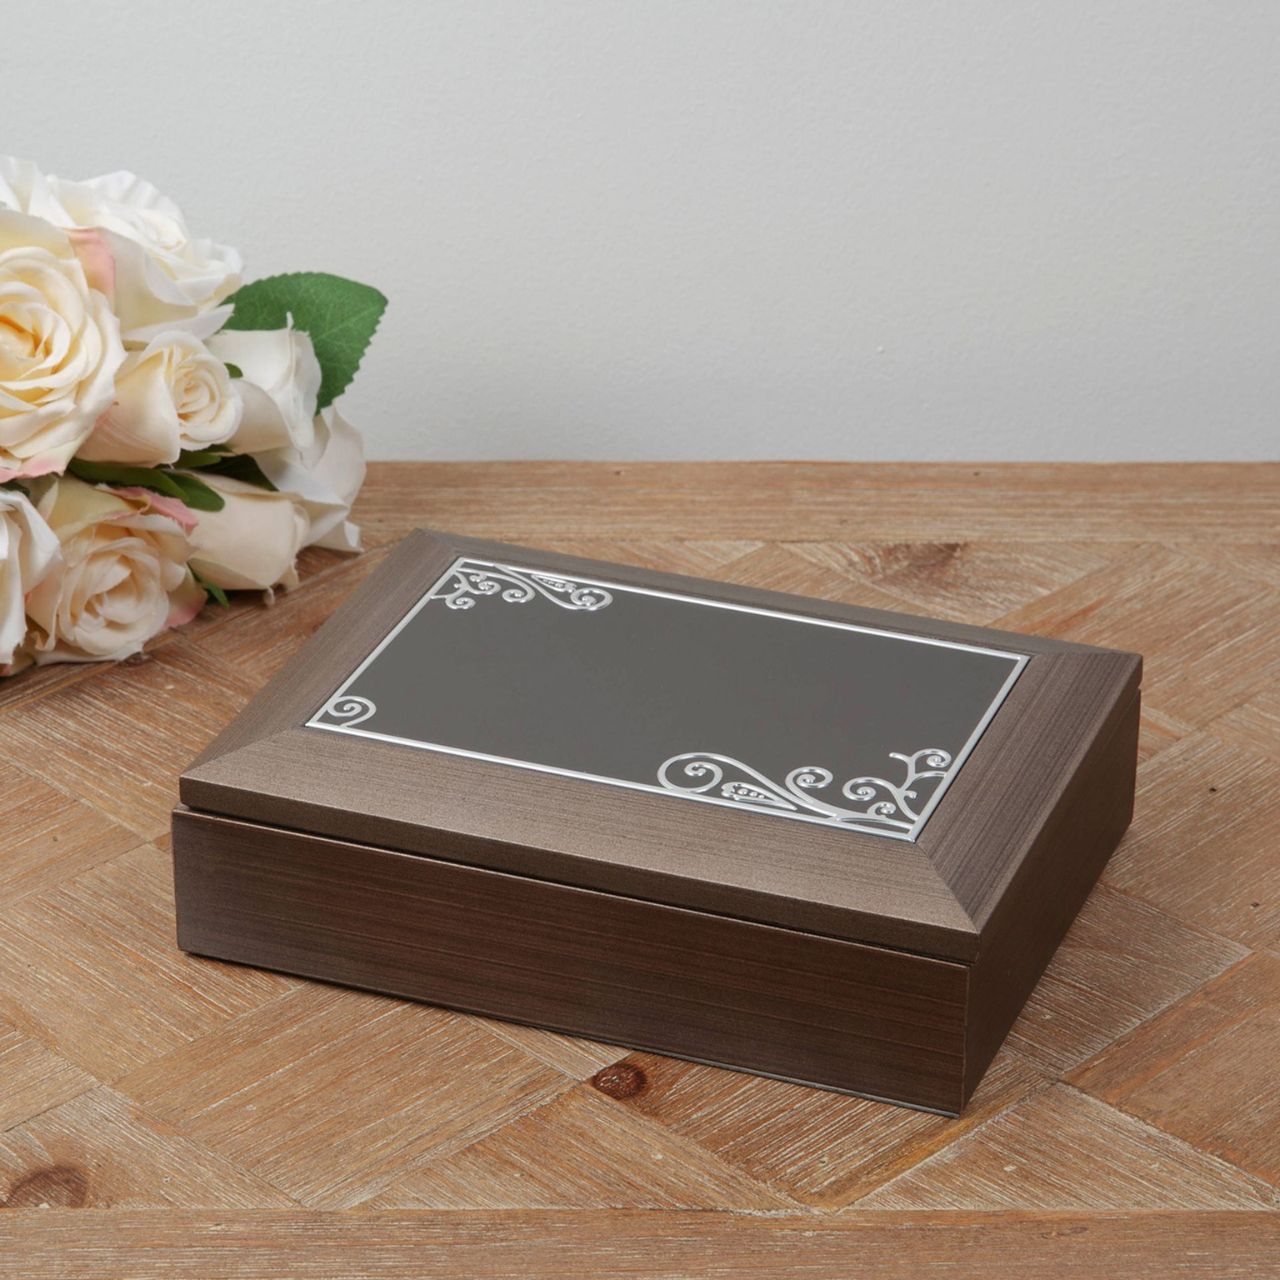 Jewellery Box Brushed Pewter Effect Wooden  A contemporary brushed pewter effect grey wooden jewellery box with an engravable metal lid plate. From SOPHIA® Ladies Gifts - the home of style and sophistication in women's giftware.